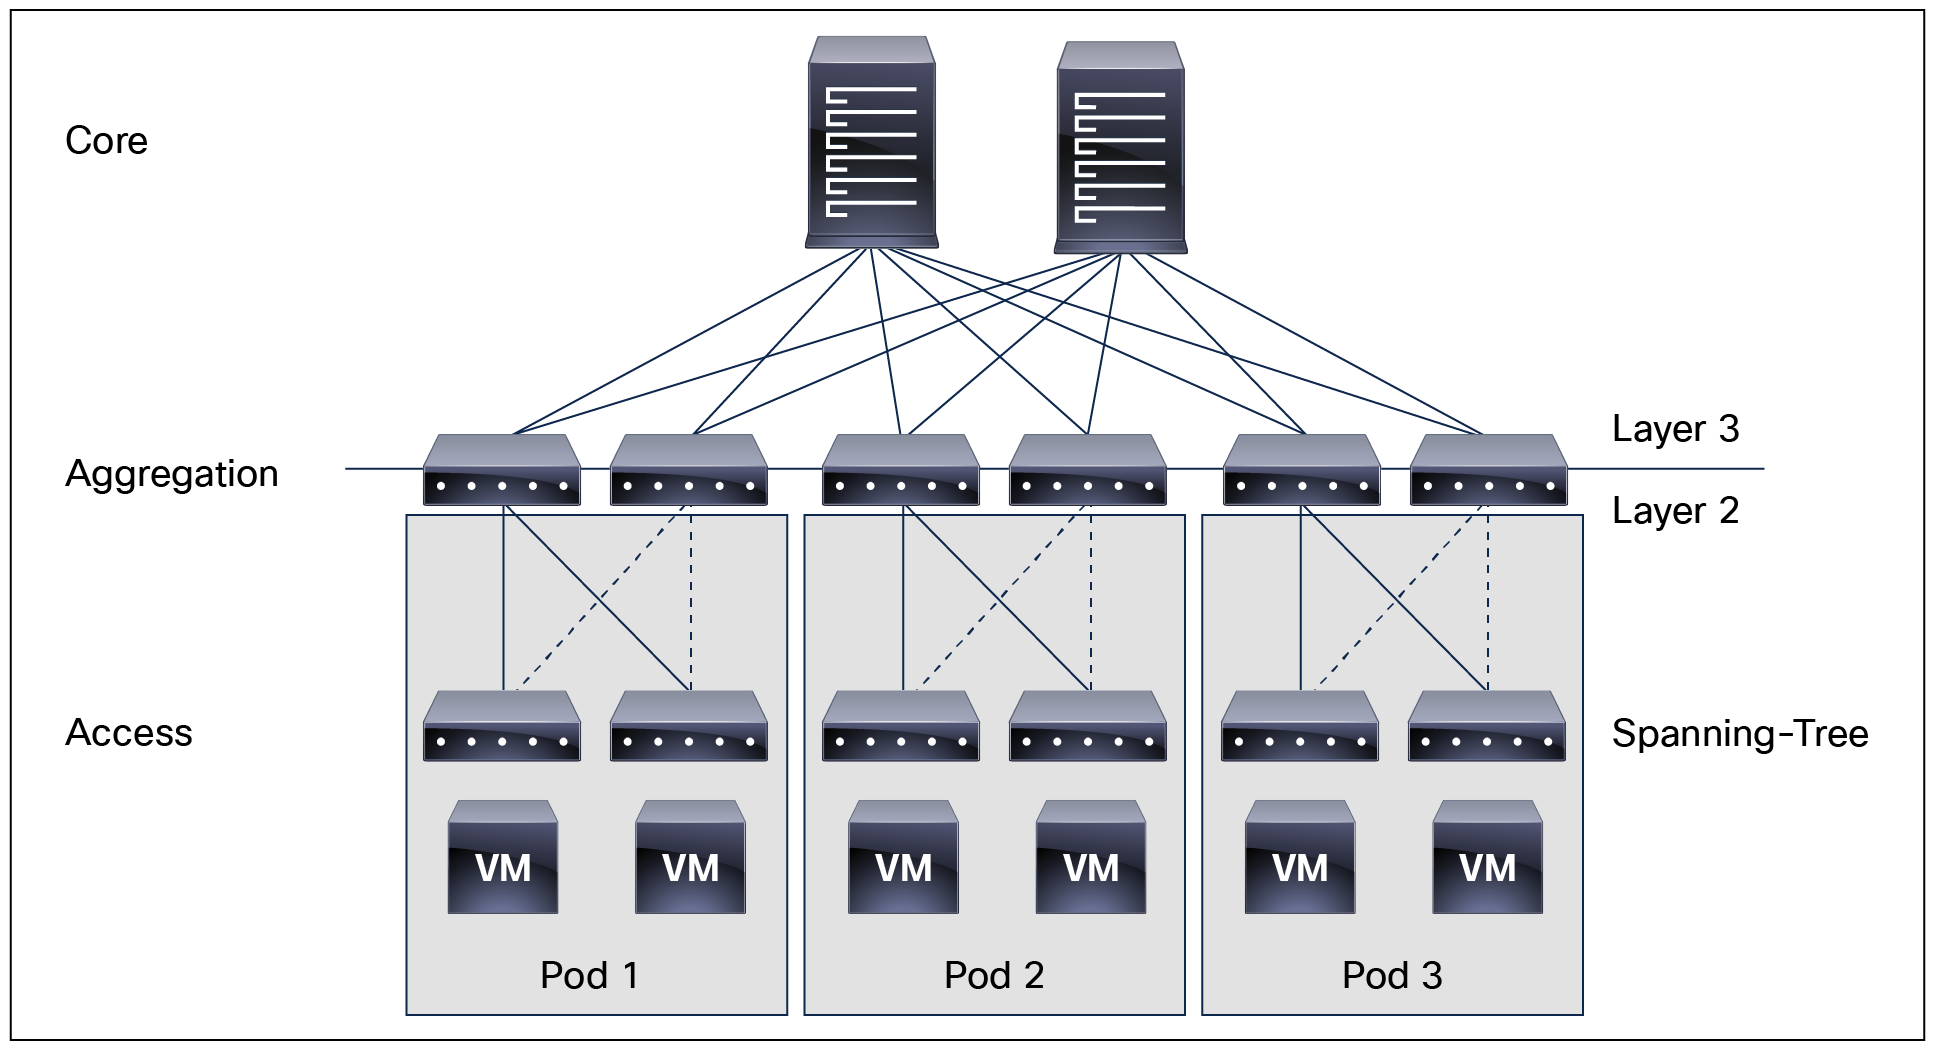 Traditional 3-tier architecture (core, aggregation, and access) topology